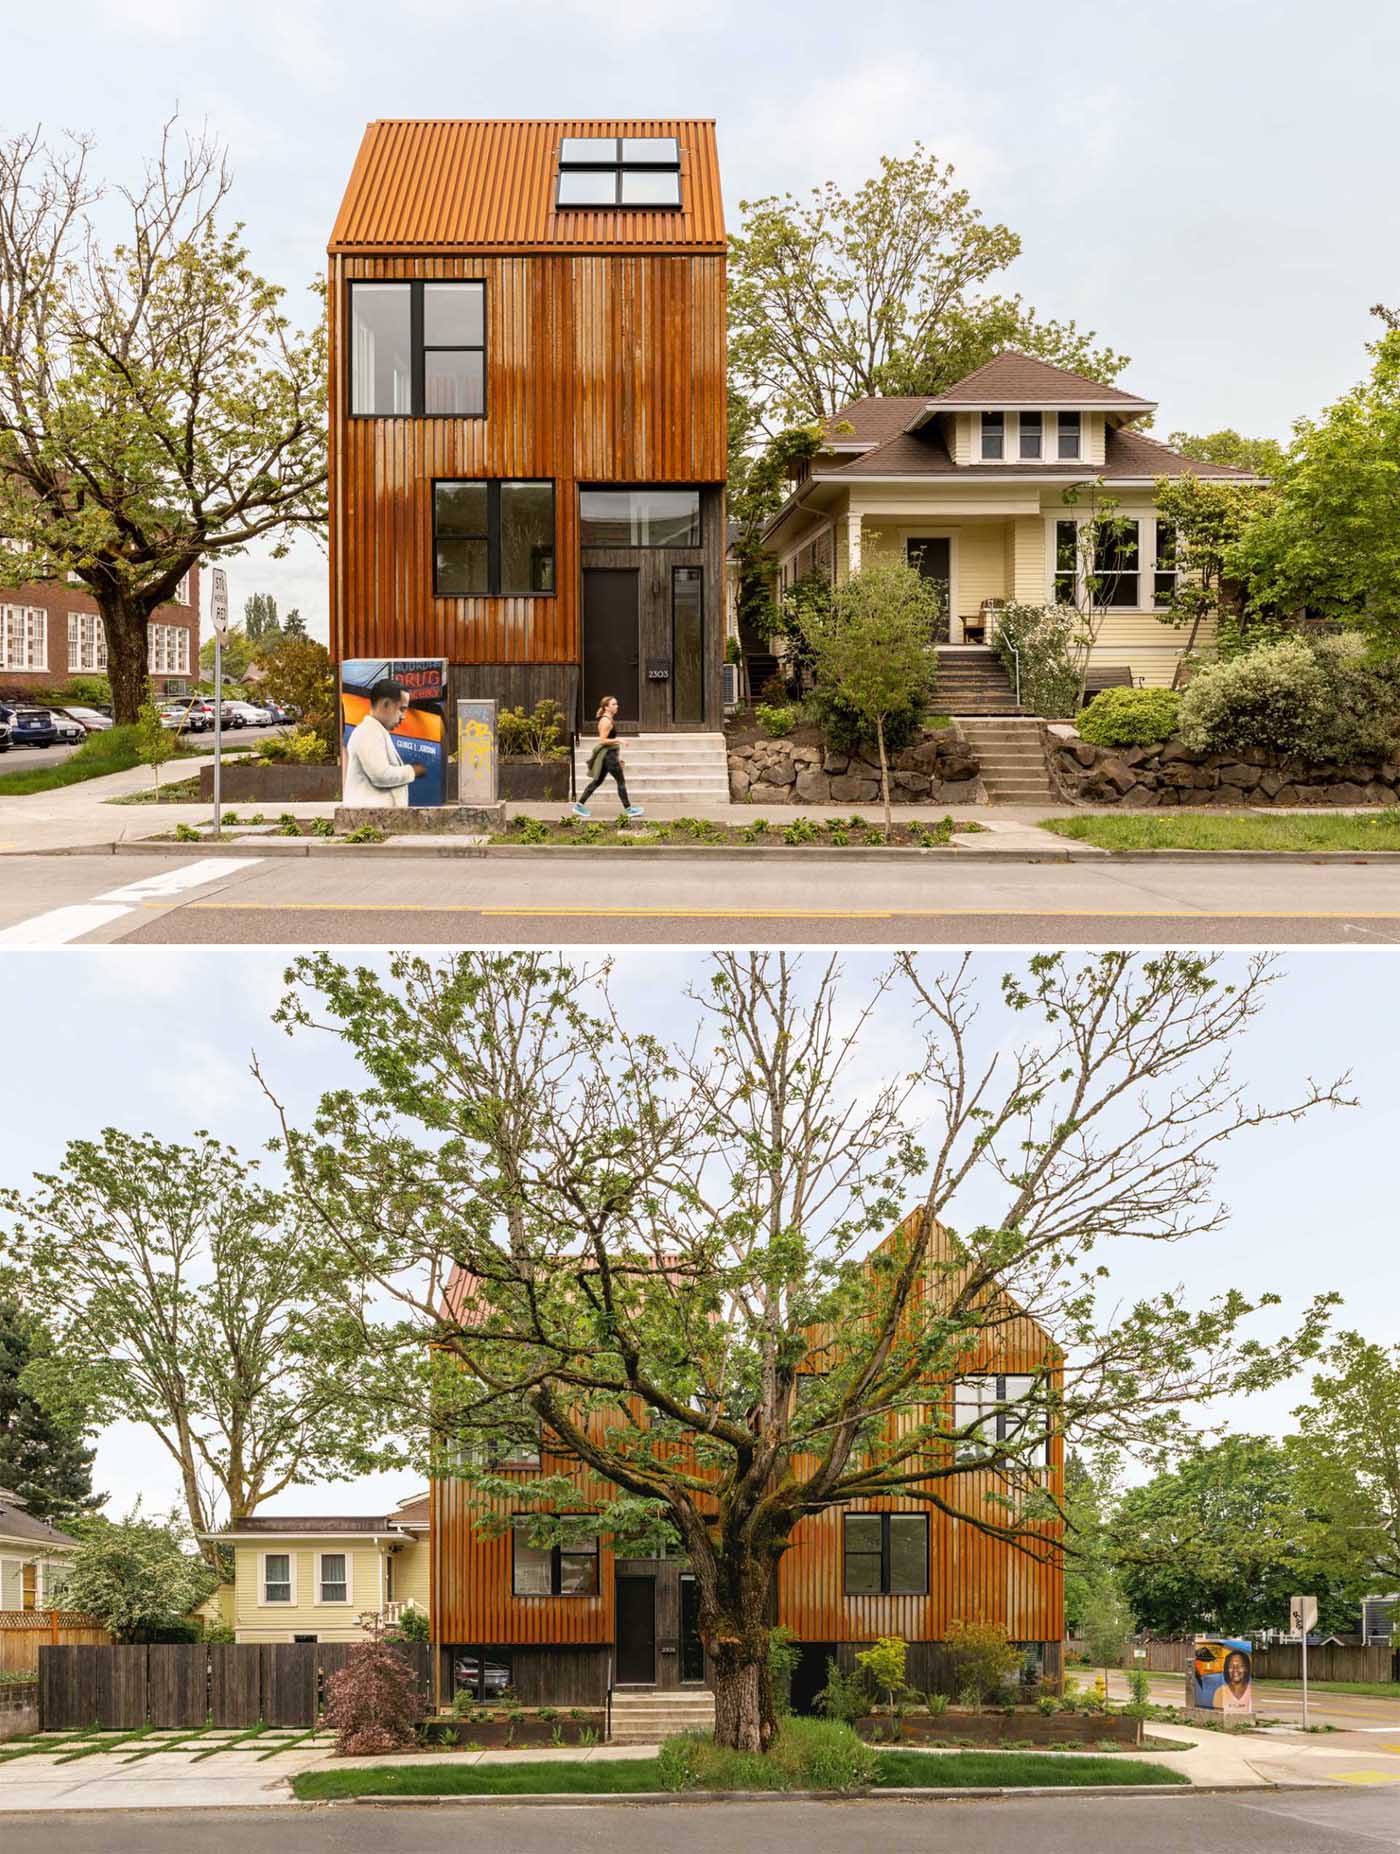 A modern townhouse on a corner, has an exterior clad in rusted corten steel.